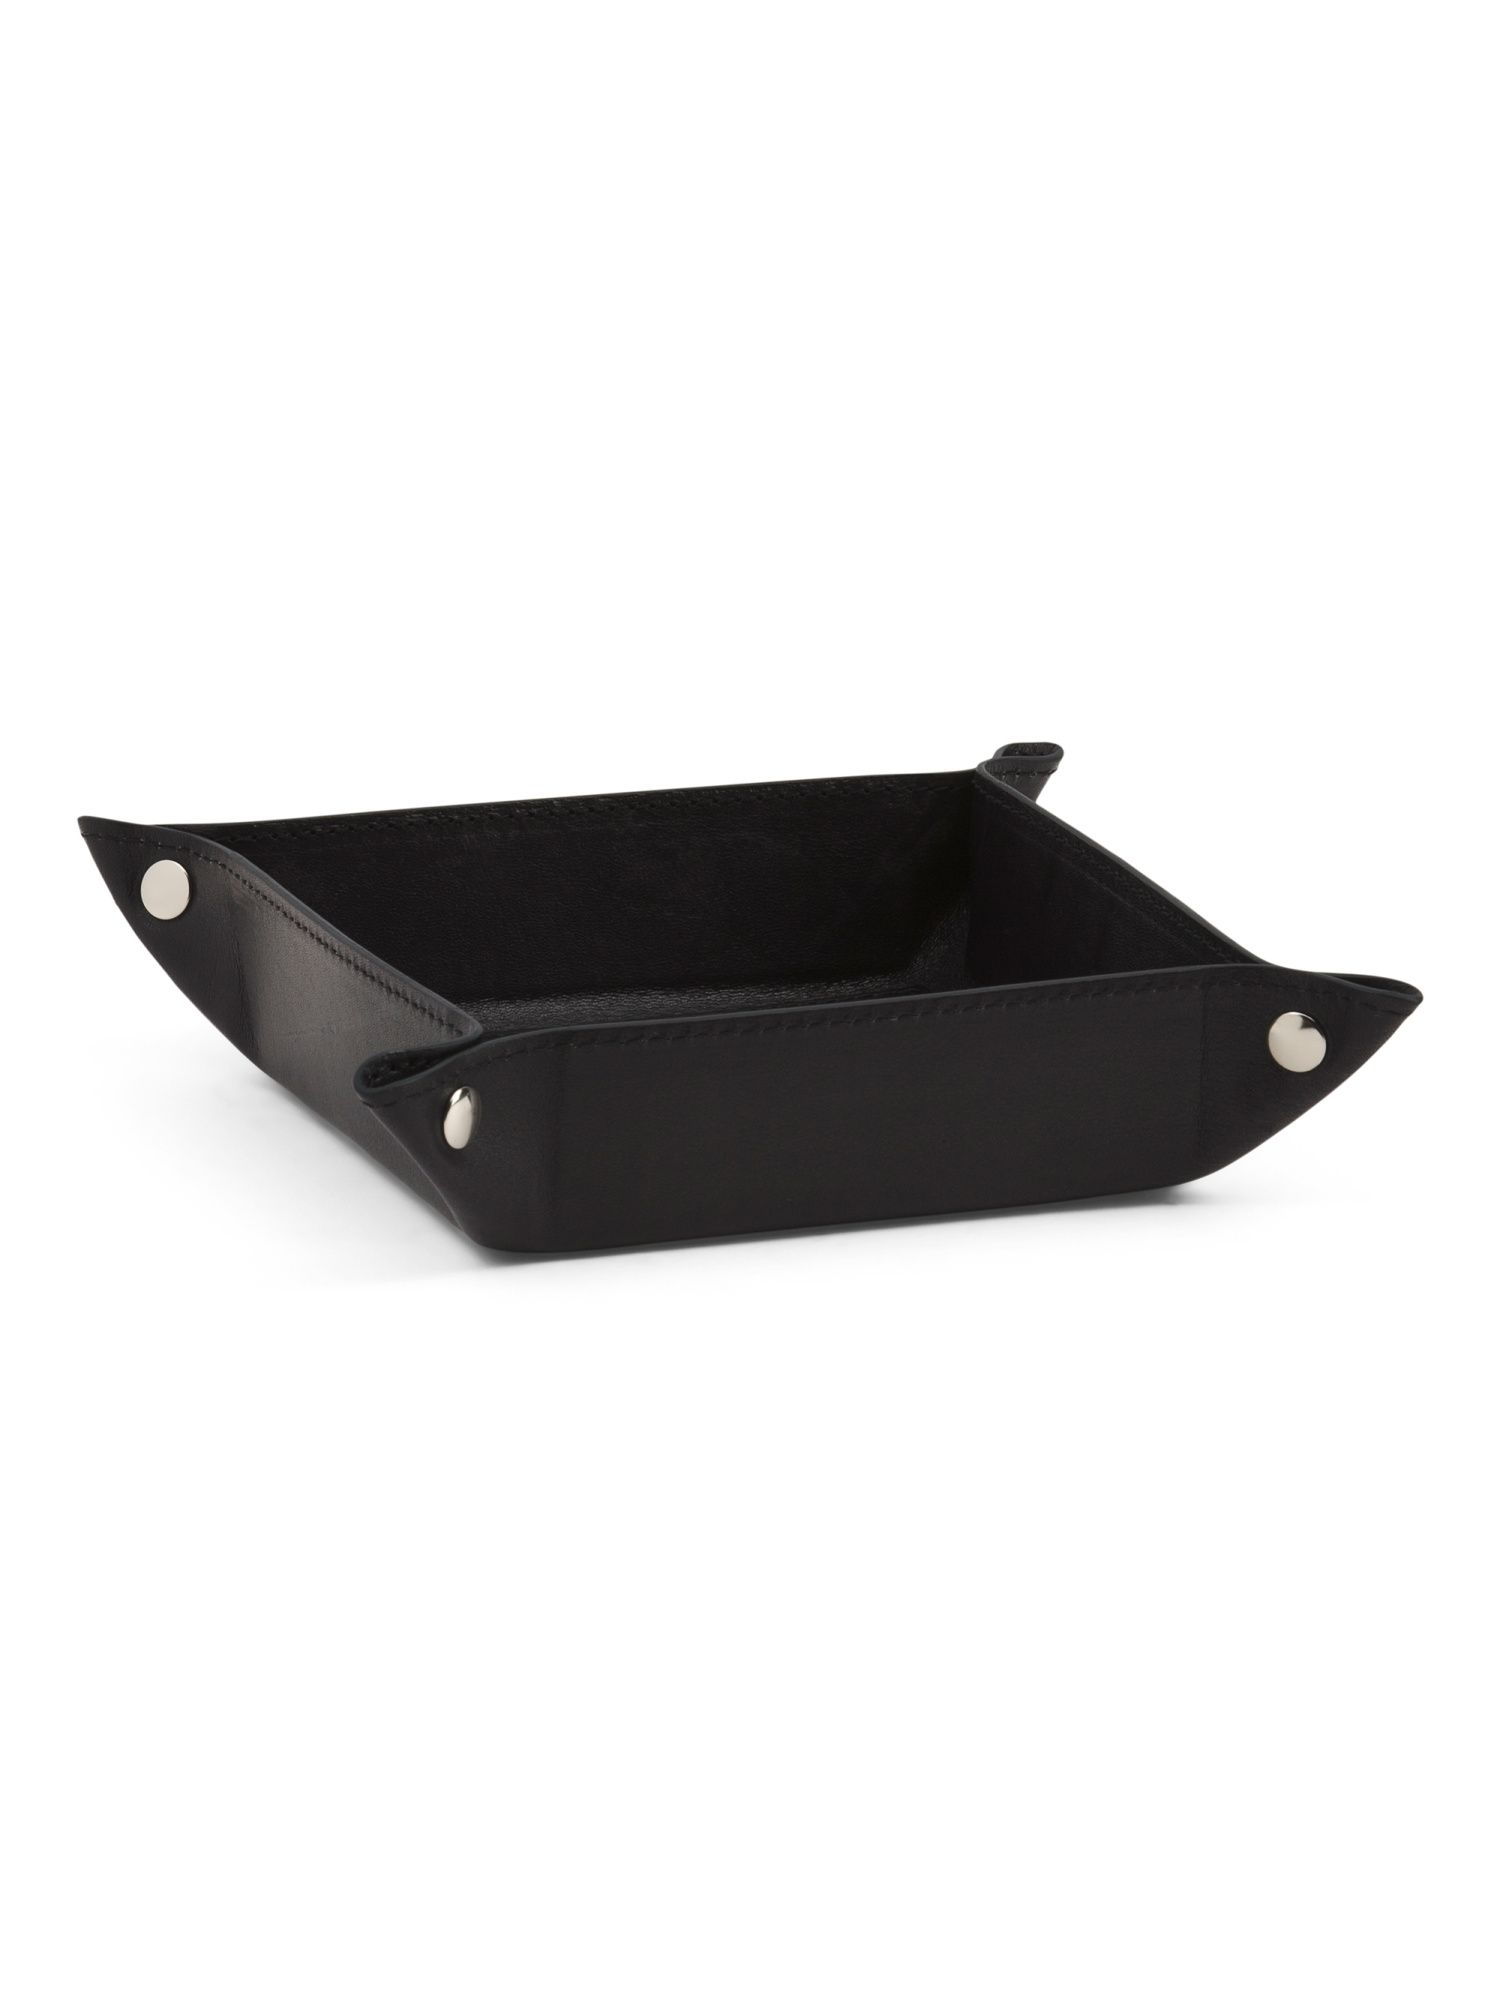 Made In Italy Leather Catch All Tray | TJ Maxx